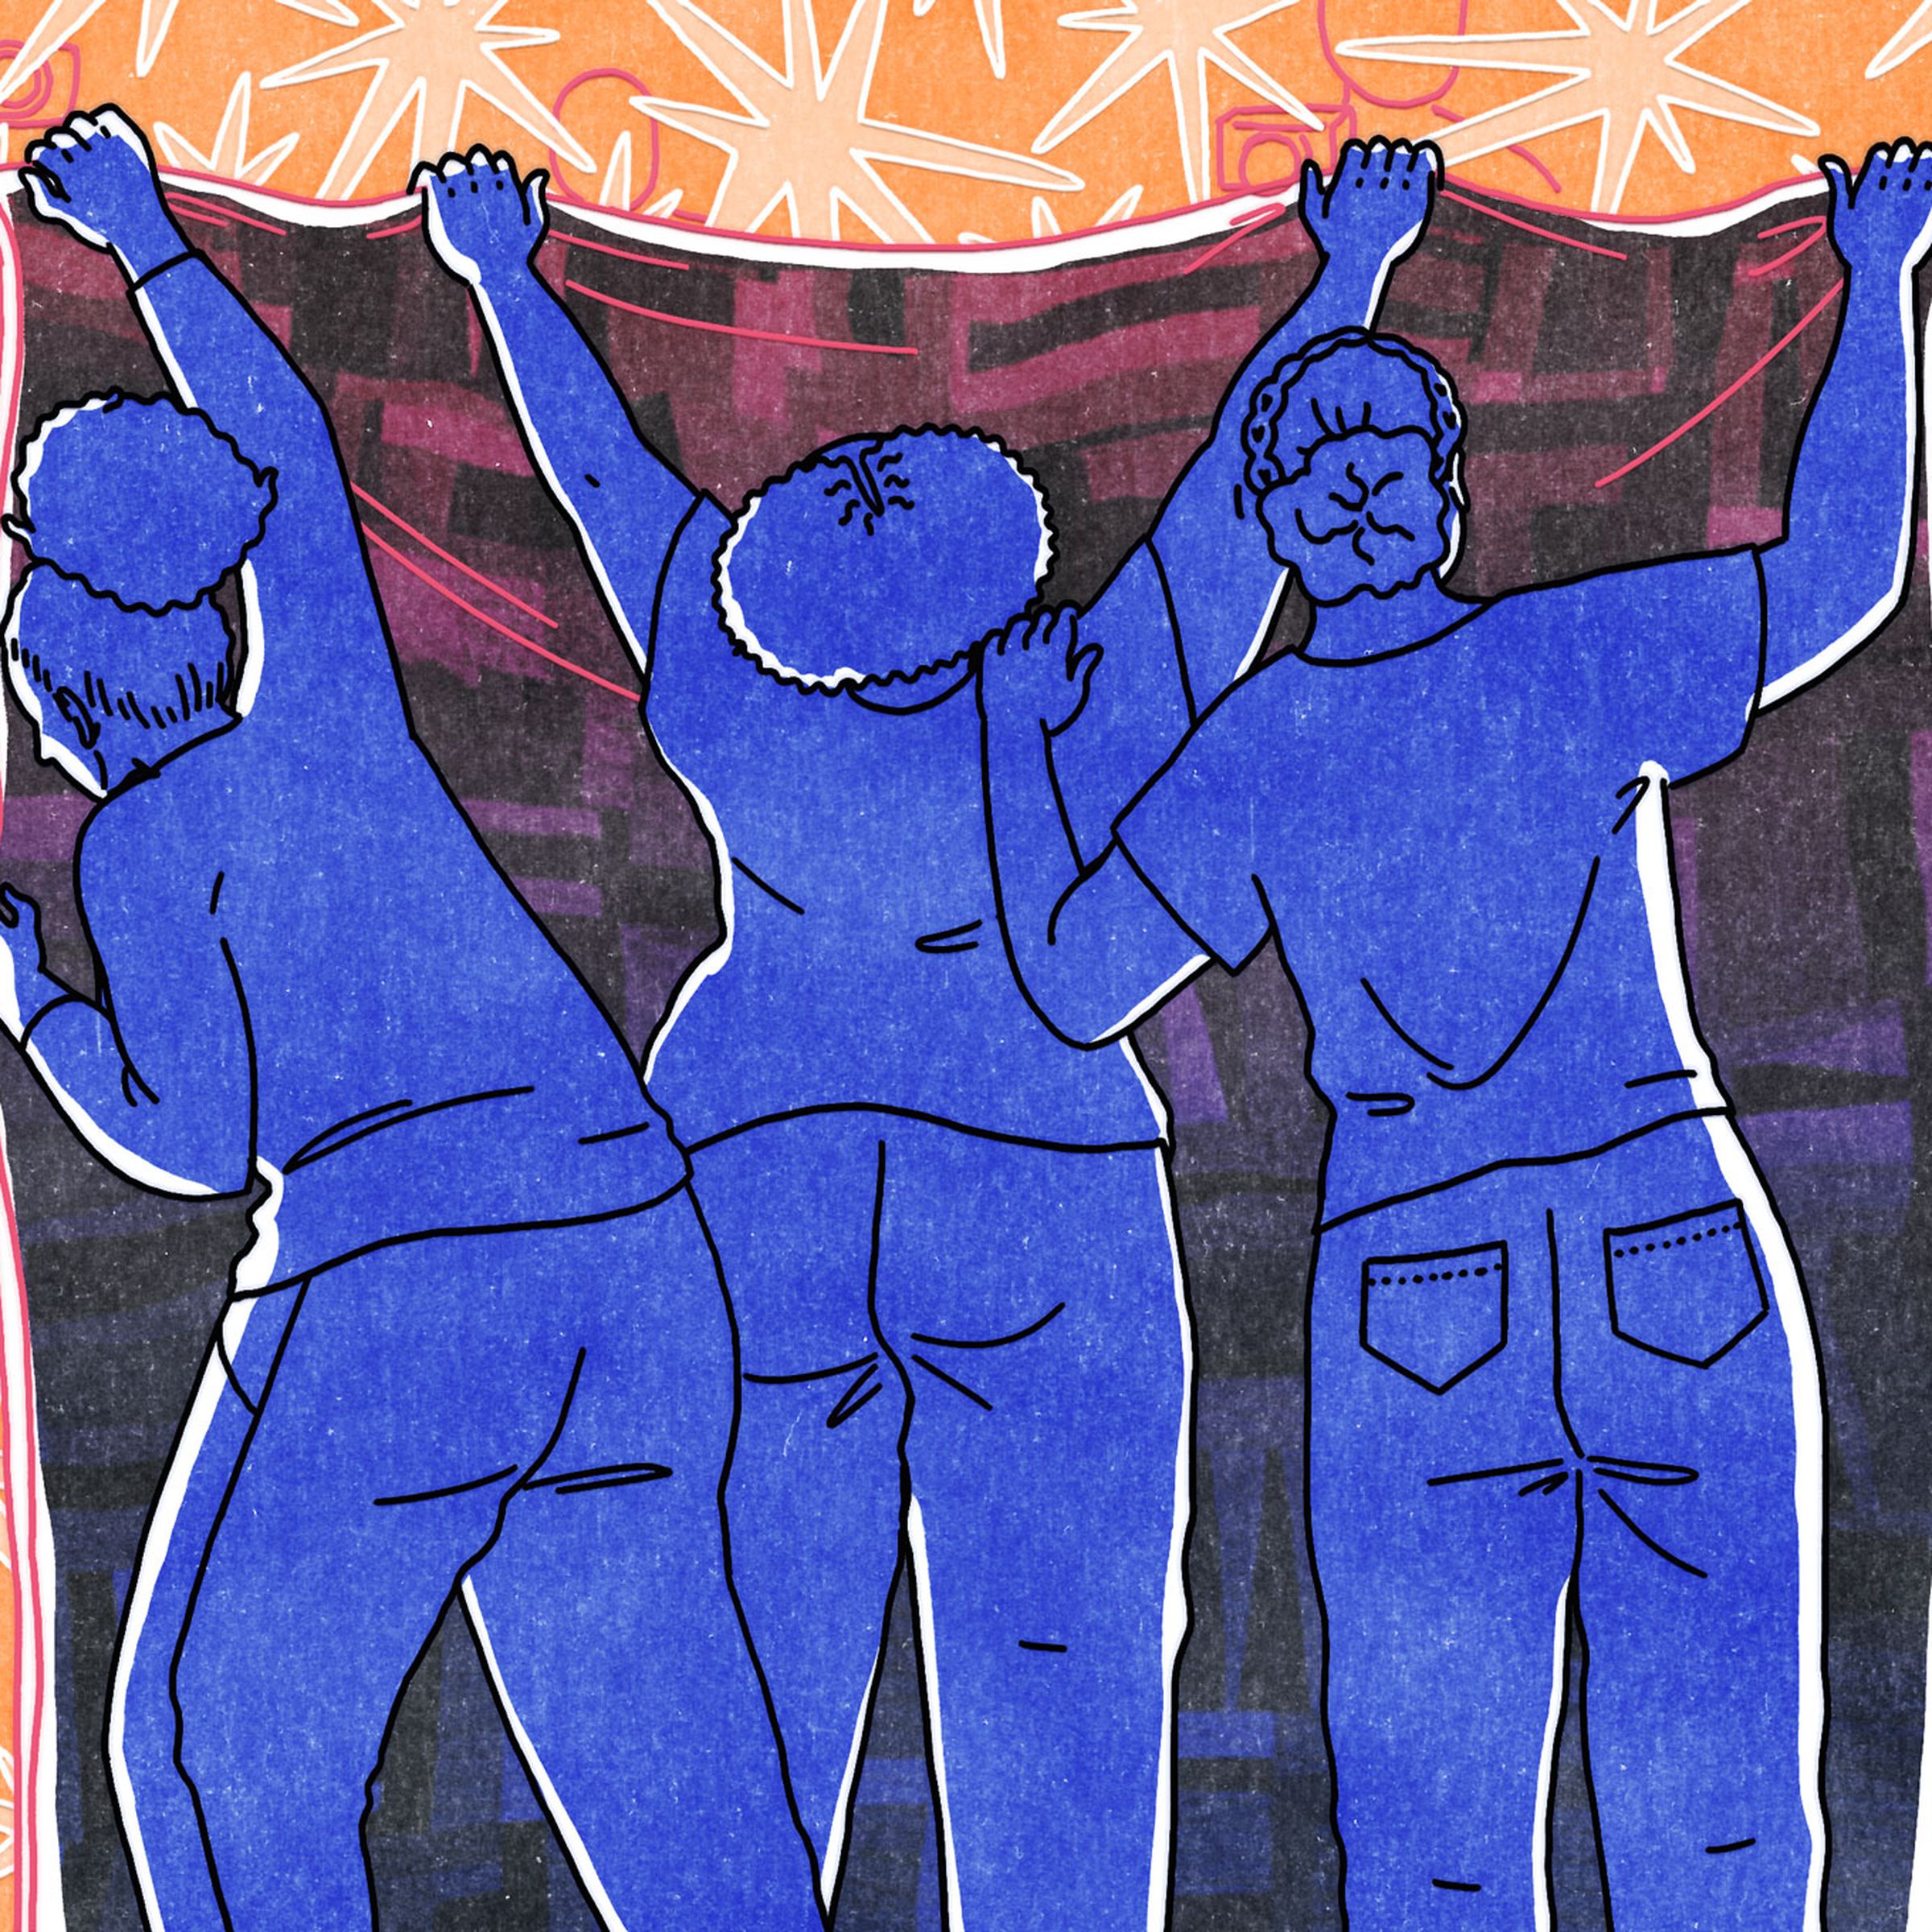 An illustration of three Black woman quilters, drawn in shades of blue, putting a quilt up against a star-patterned orange background.